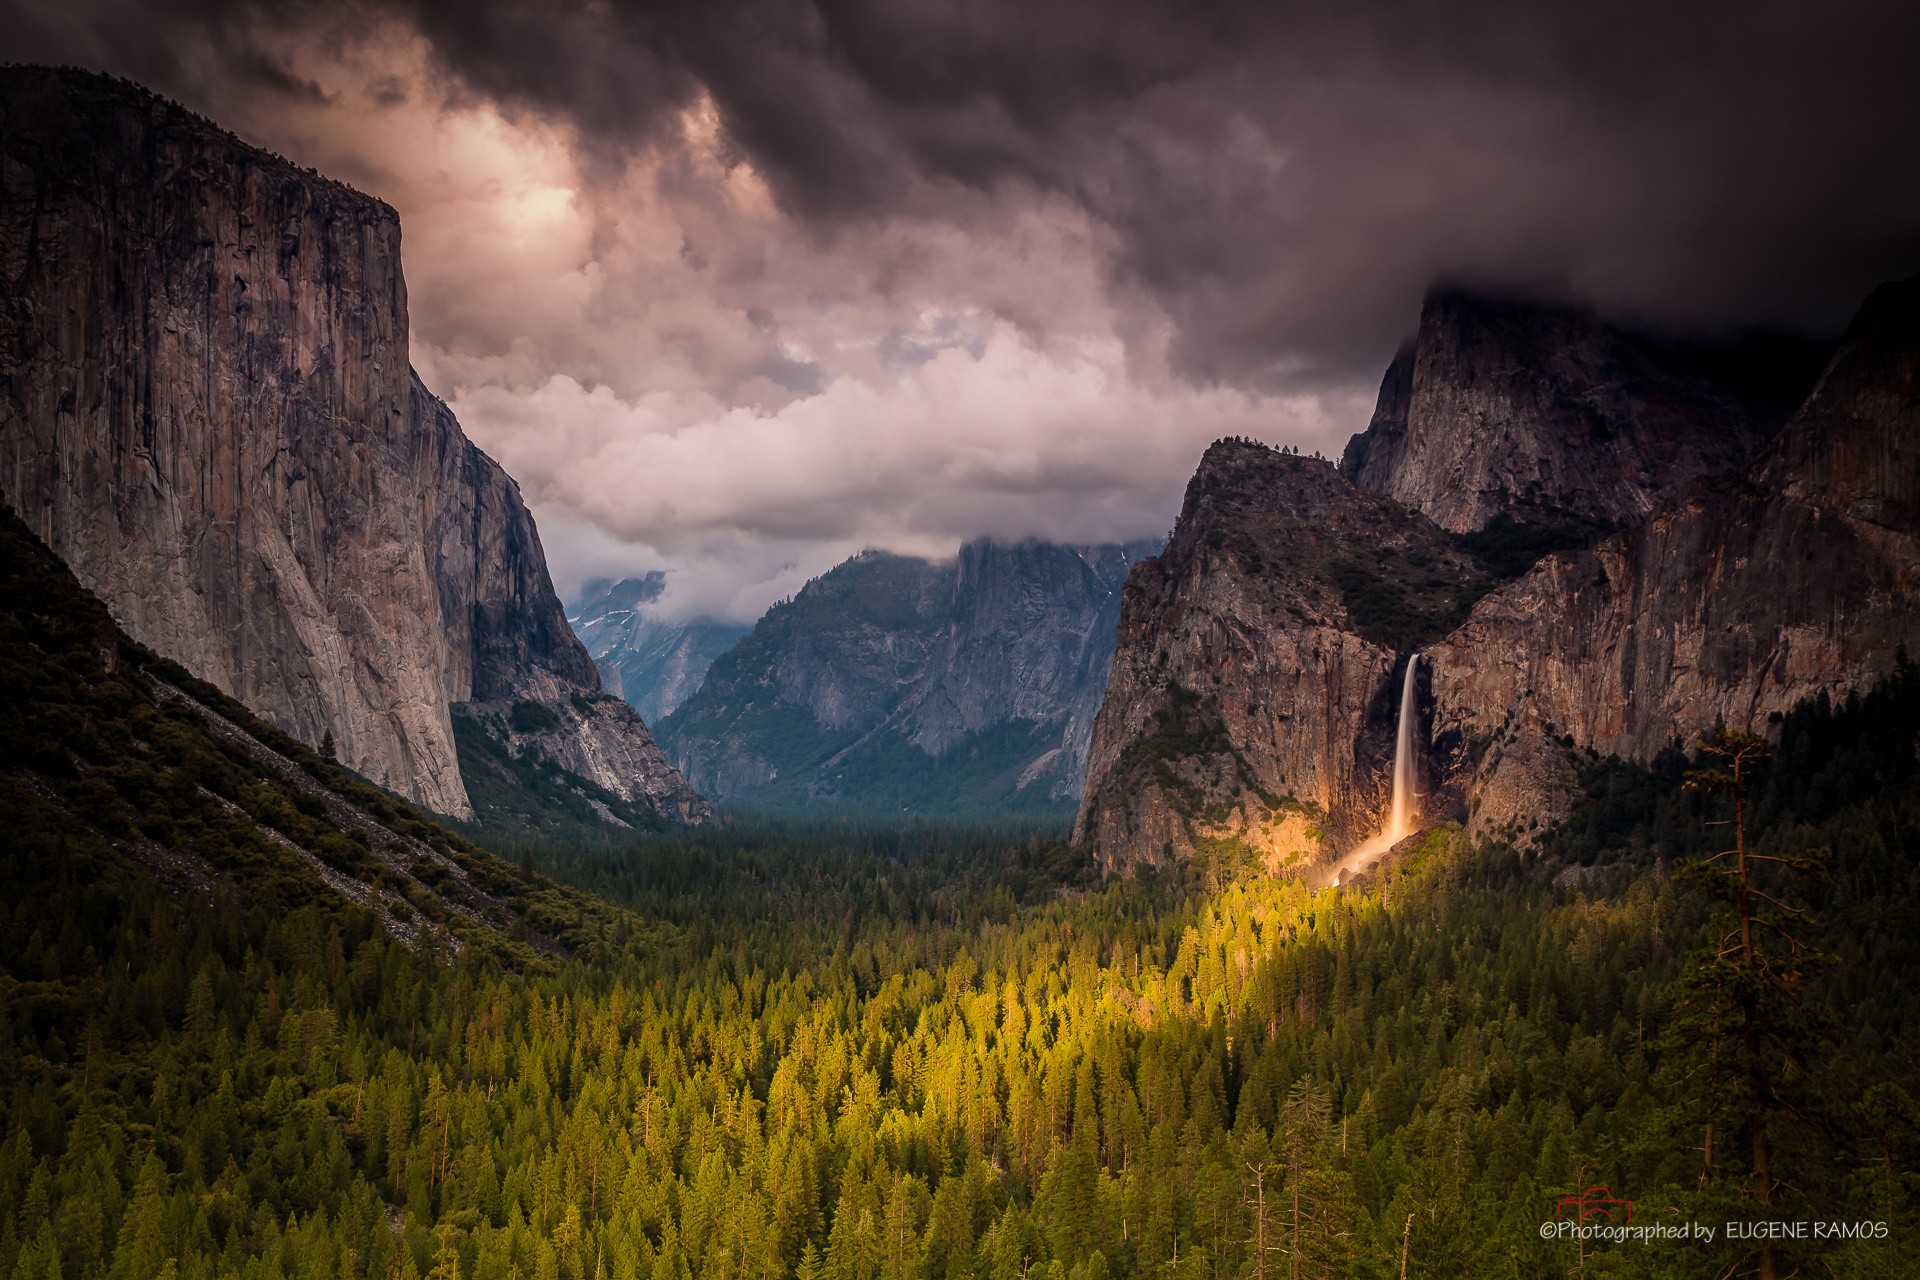 General 1920x1280 overcast Yosemite National Park cliff mountains forest landscape USA California nature Bridalveil Fall Yosemite Valley El Capitan watermarked